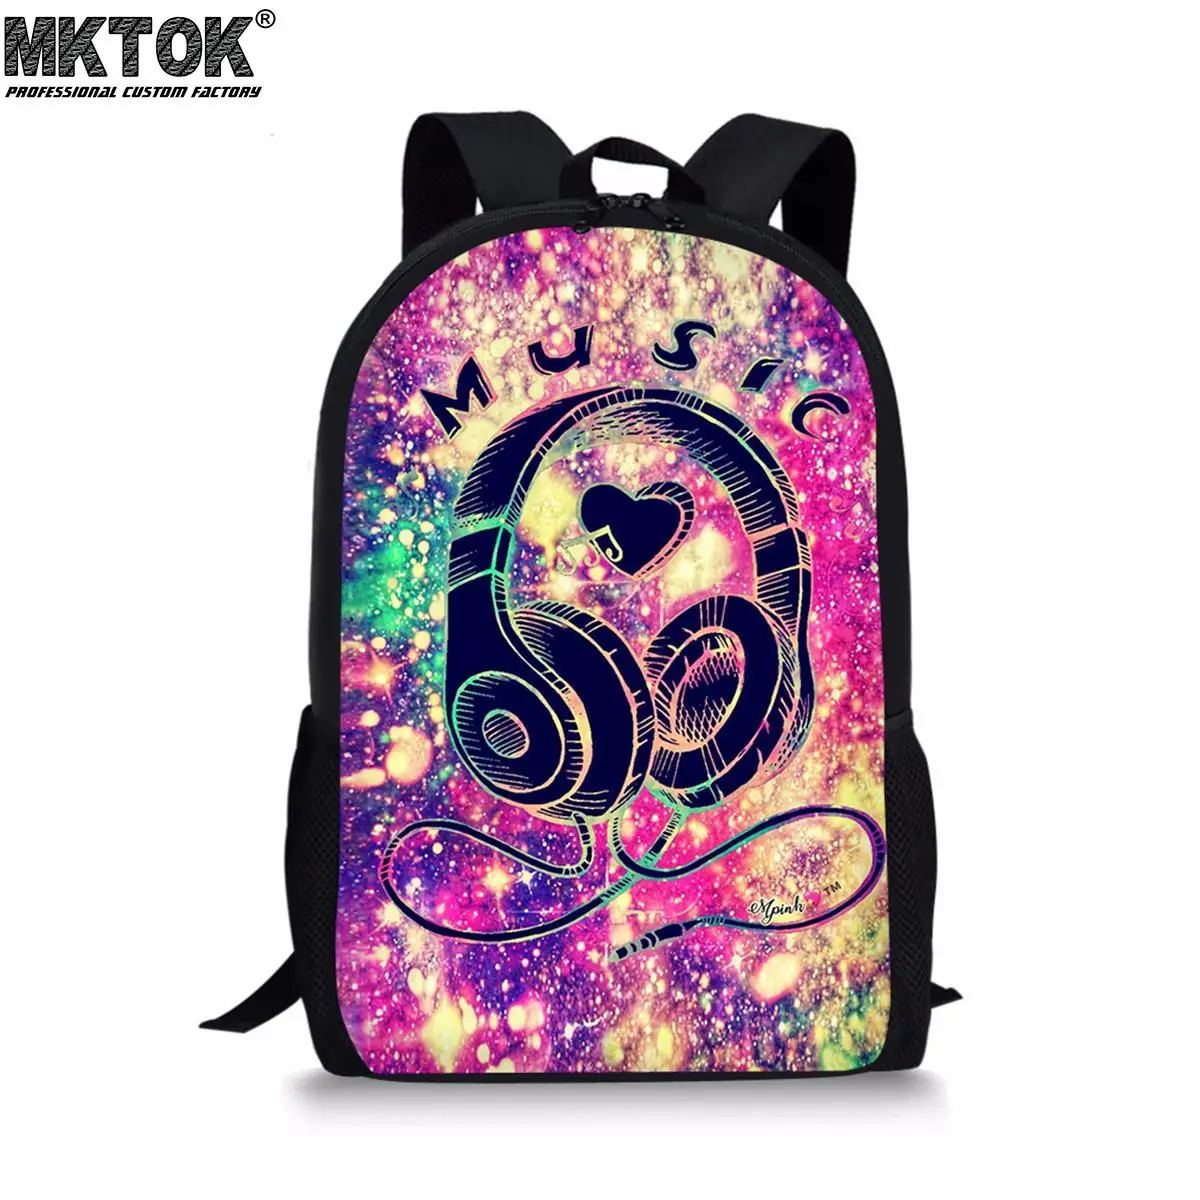 Star Music Headset Pattern Girls School Bags Large Capacity Mochilas Escolares Adjustable Strap Students Satchel Free Shipping